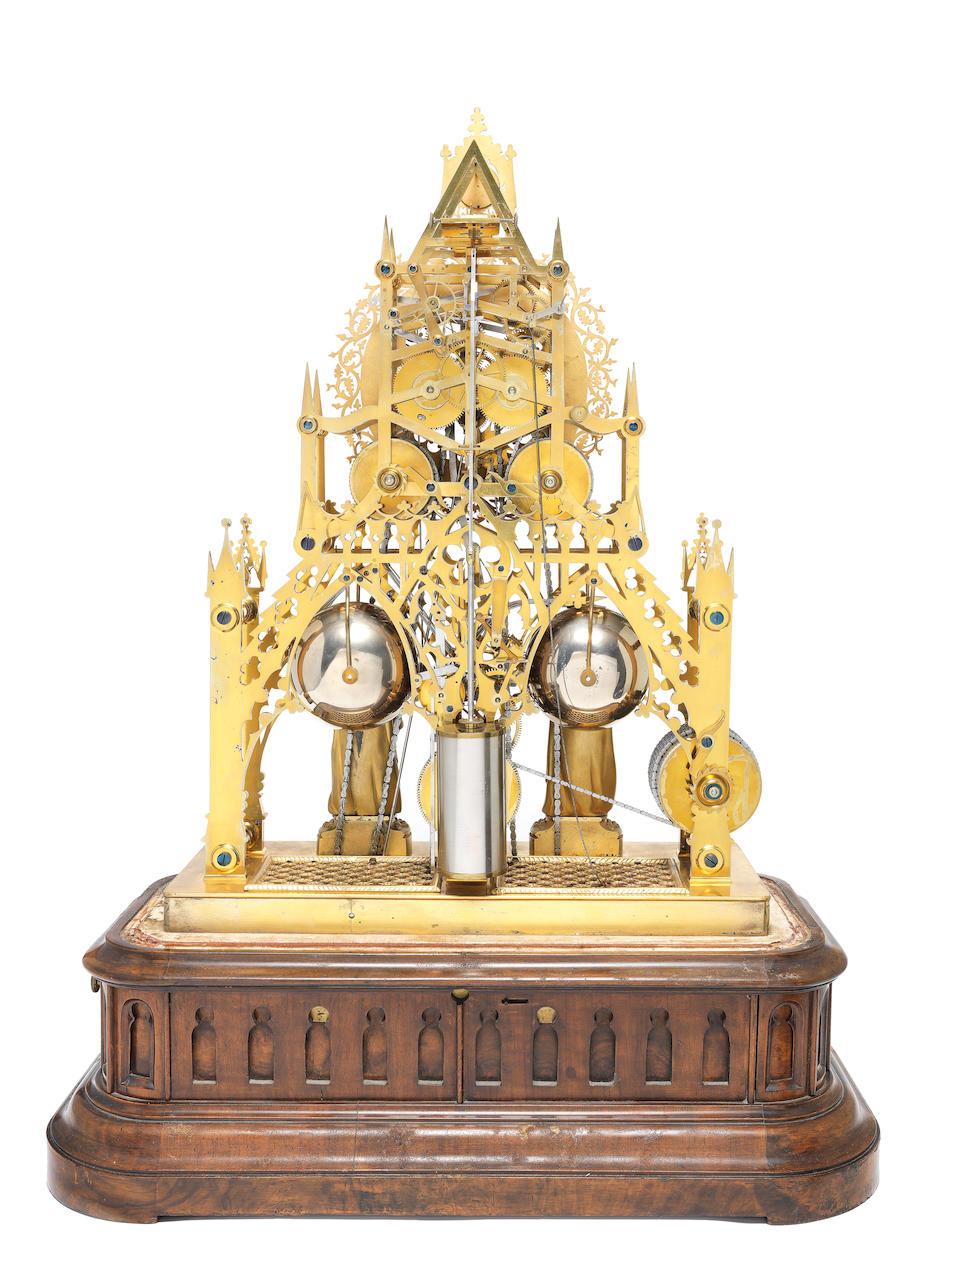 A very fine late 19th century Exhibition-quality, quarter chiming skeleton clock with special escapement, remote winding and remote hand setting, with the original glass dome and walnut base Camerer Kuss & Co, 56 New Oxford St, London